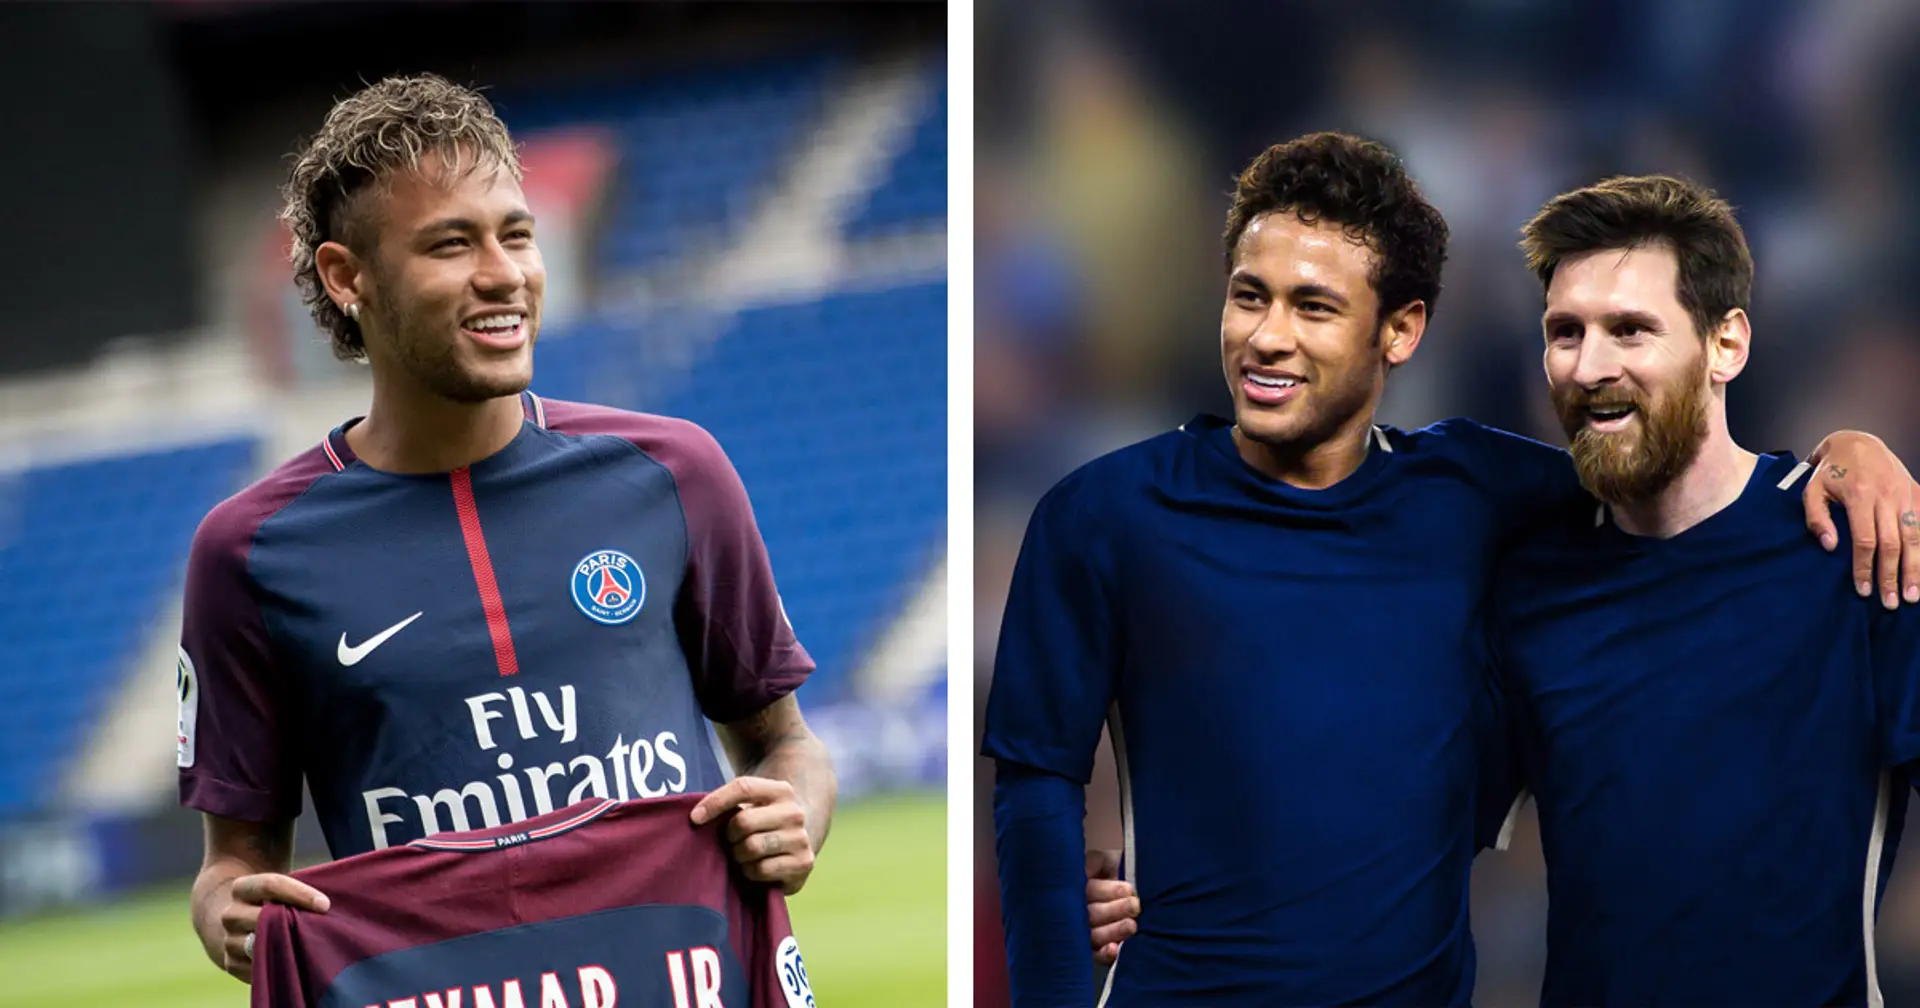 Why did Neymar leave Barcelona in the first place? You asked, we answered